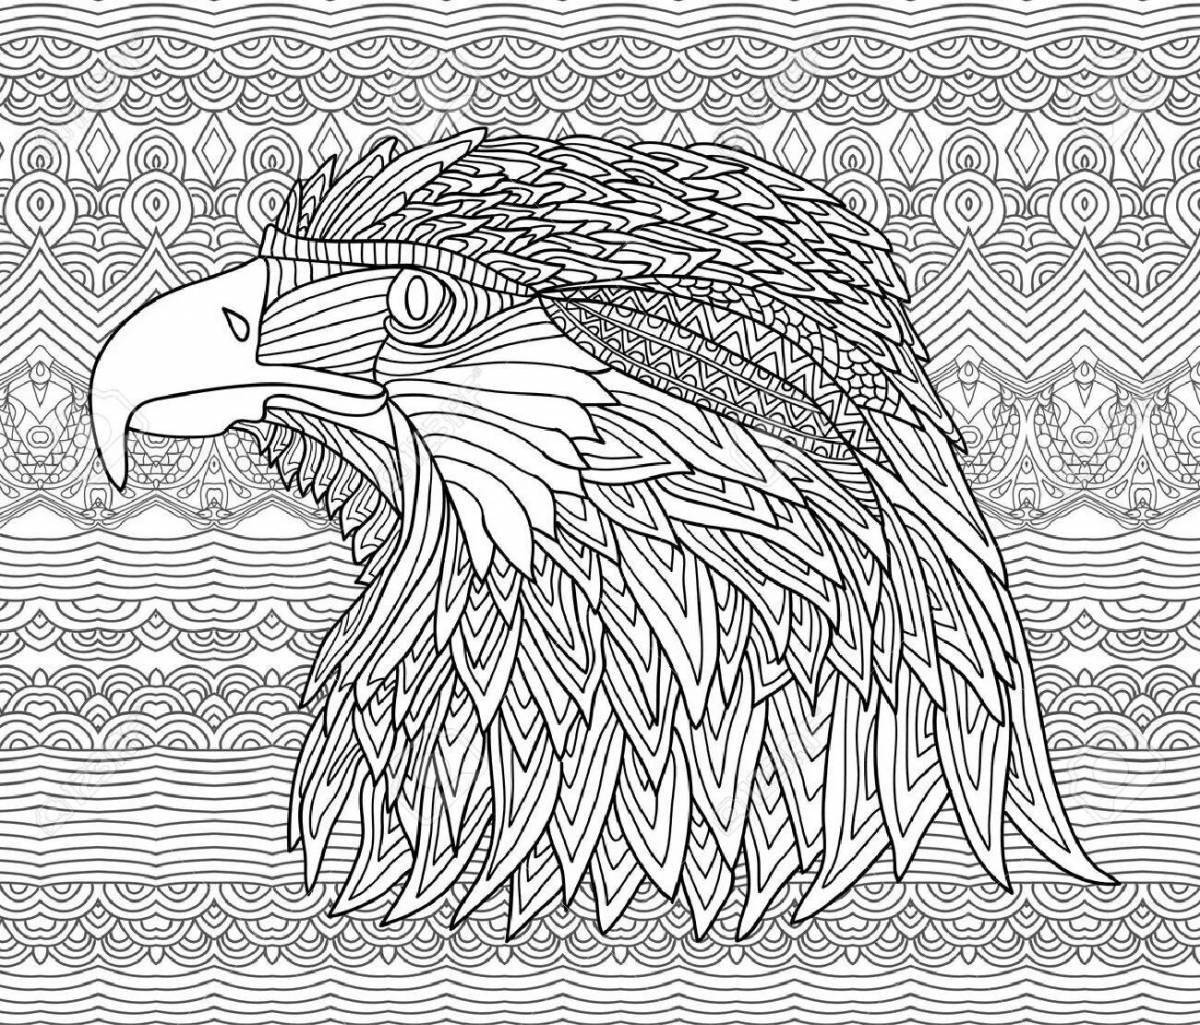 Awesome anti-stress eagle coloring book